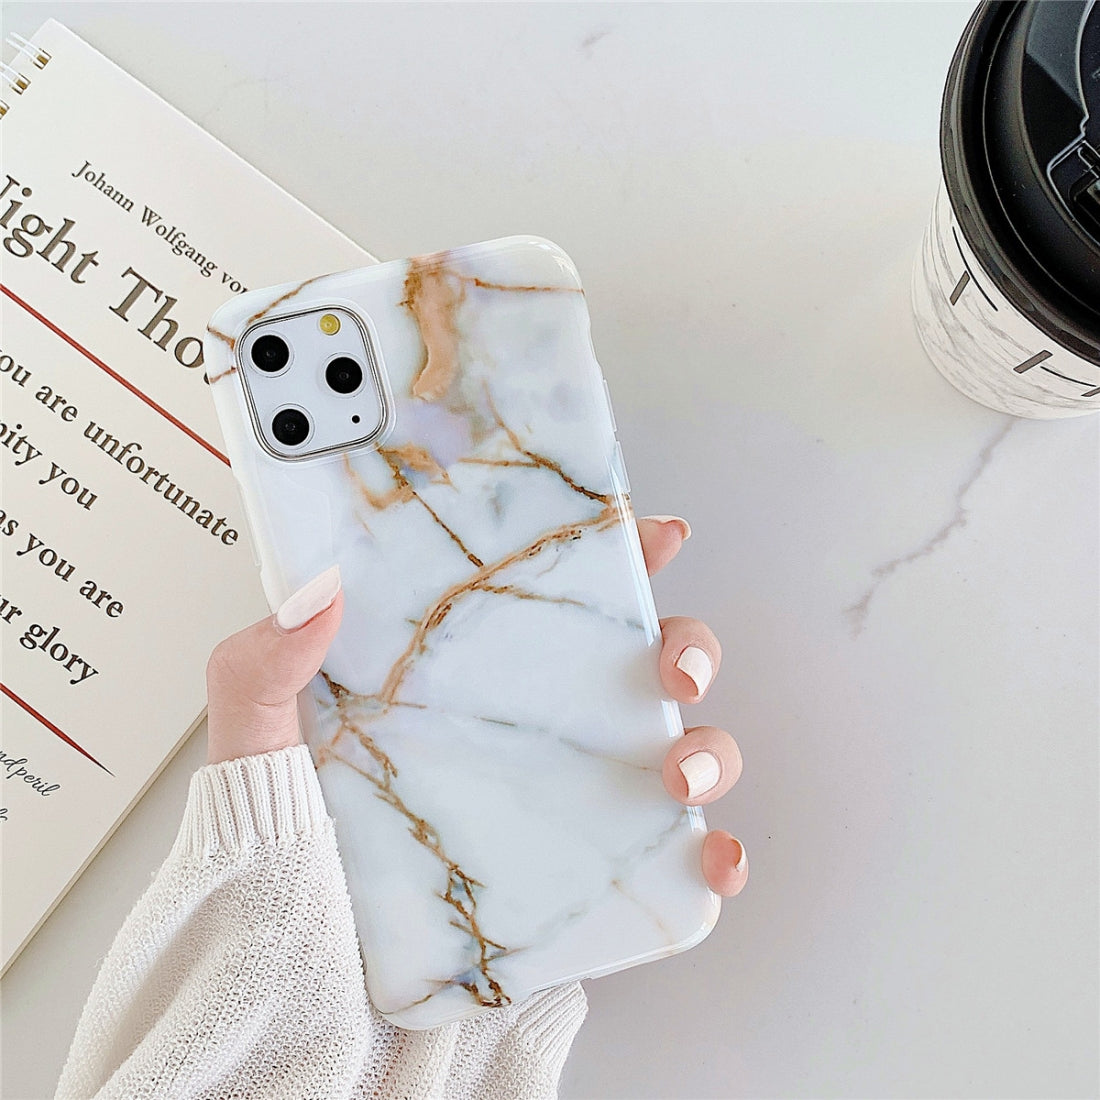 AMZER Marble IMD Soft TPU Protective Case for iPhone 11